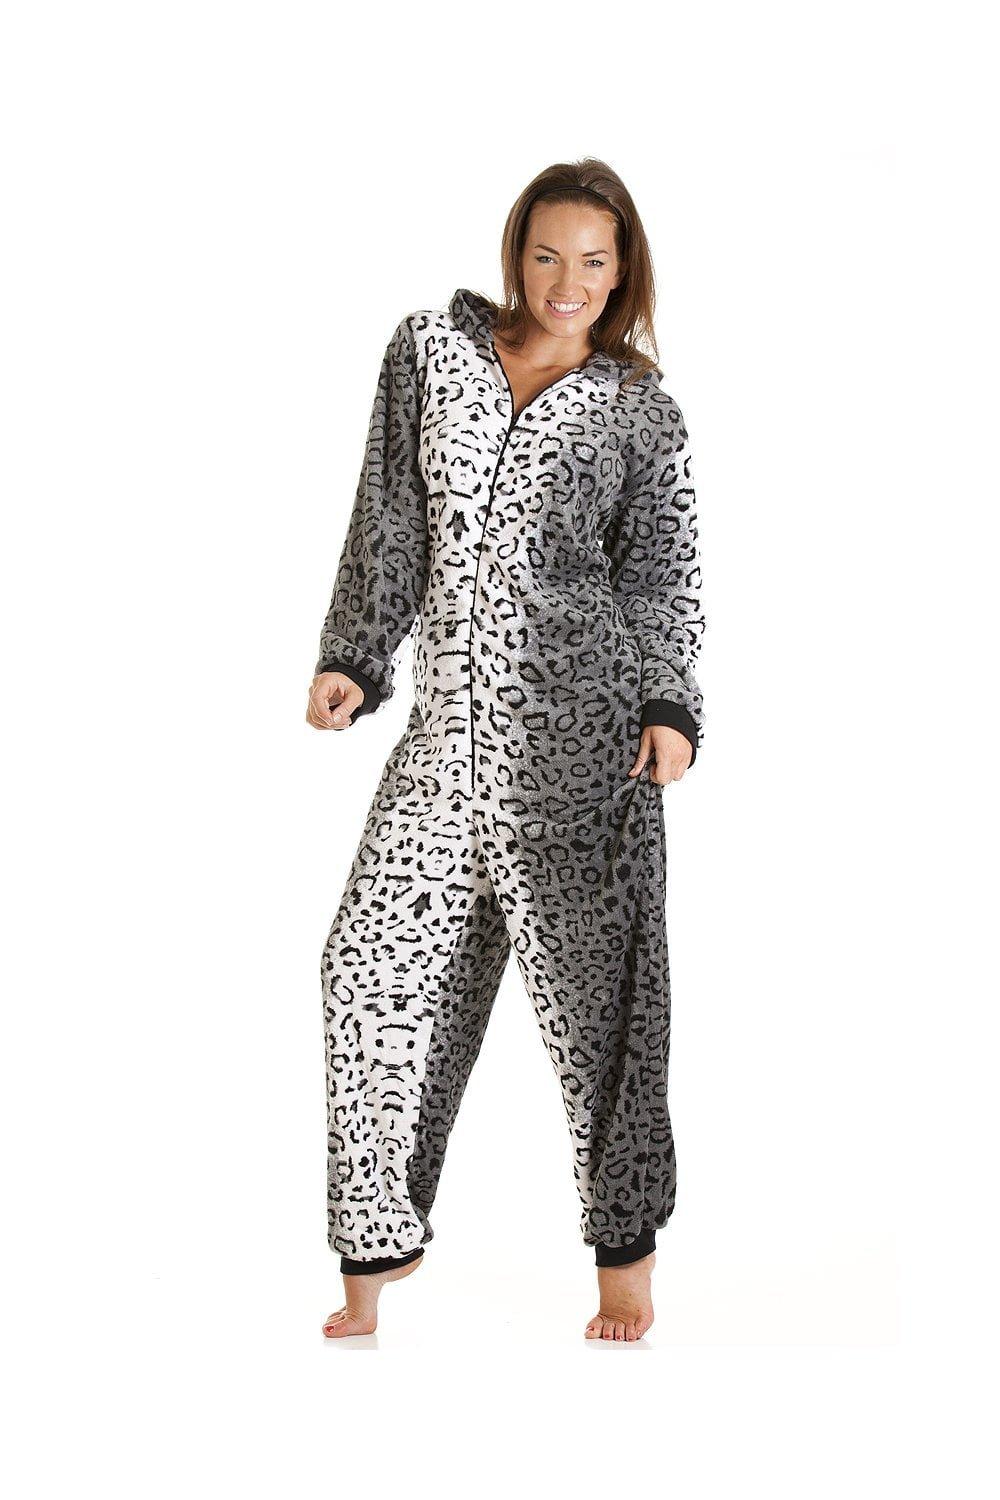 Supersoft All In One Snow Leopard Animal Print Onesie